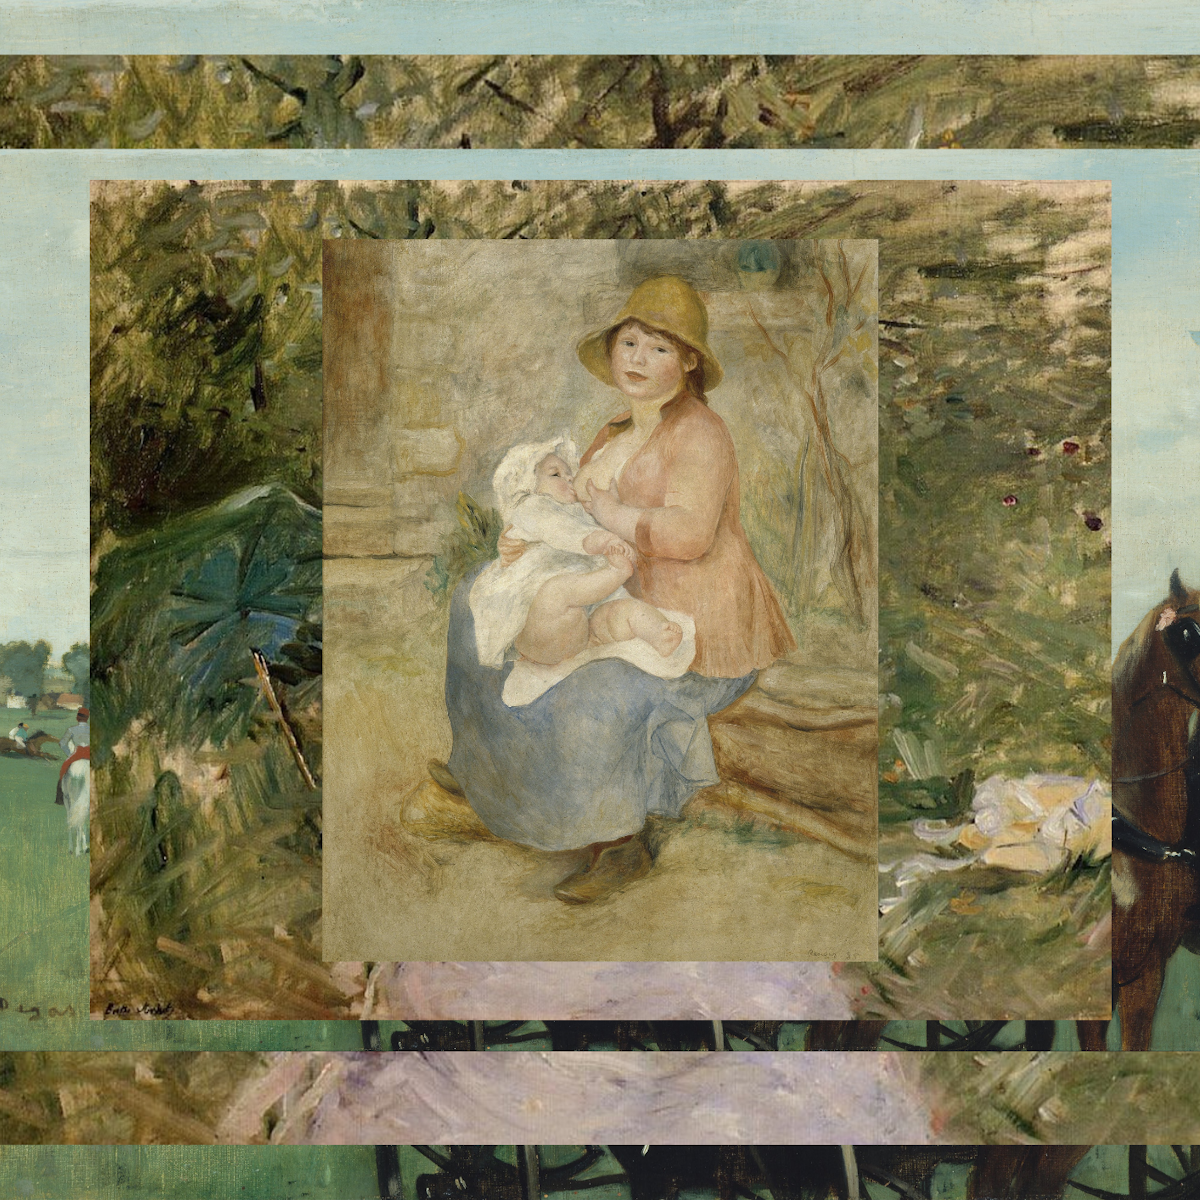 Three Impressionist paintings that give an insight into the complicated  history of breastfeeding in the 19th century